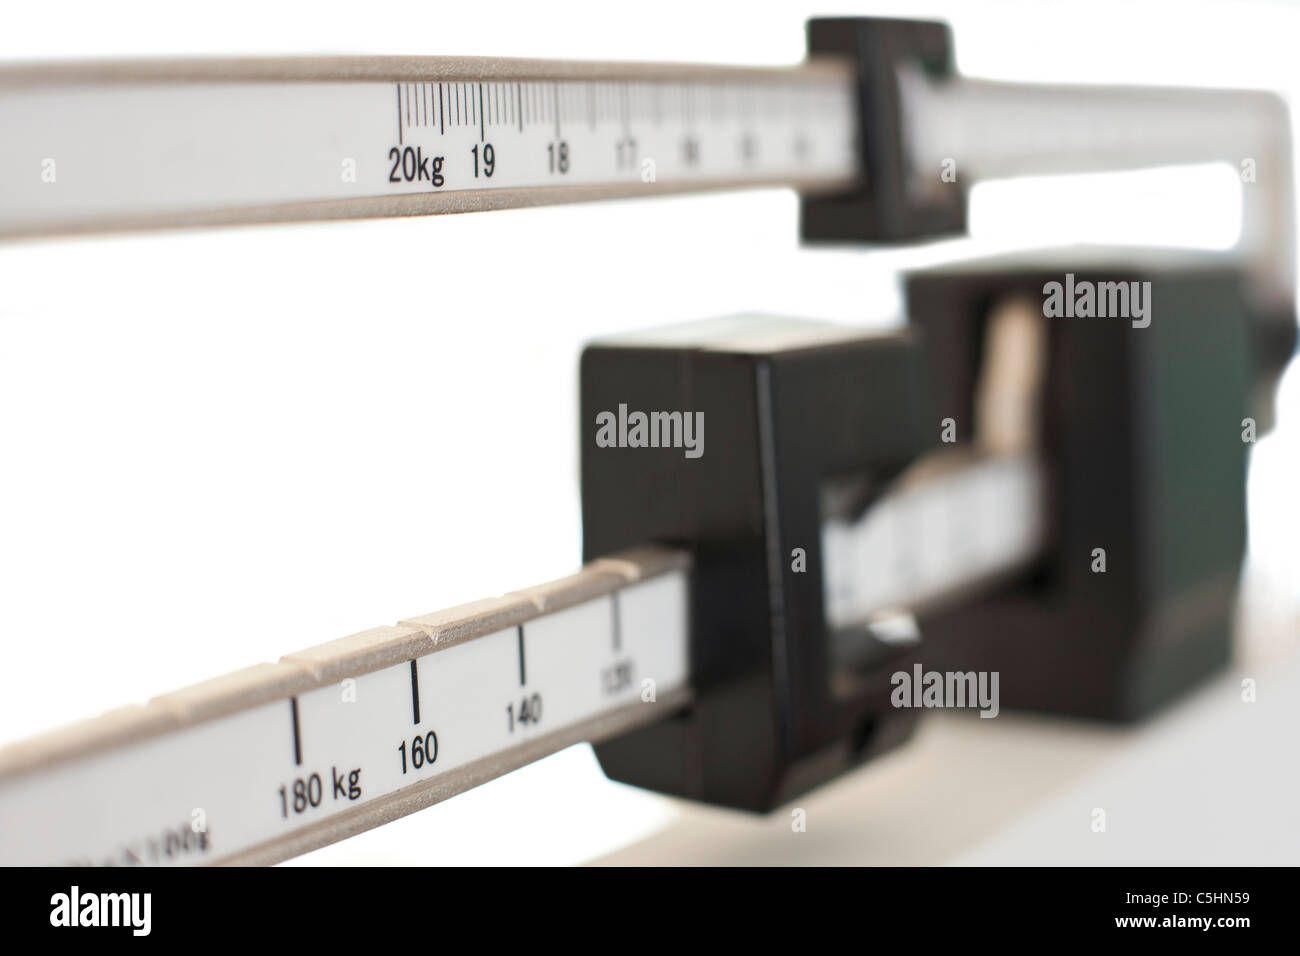 Weighing scale Stock Photo